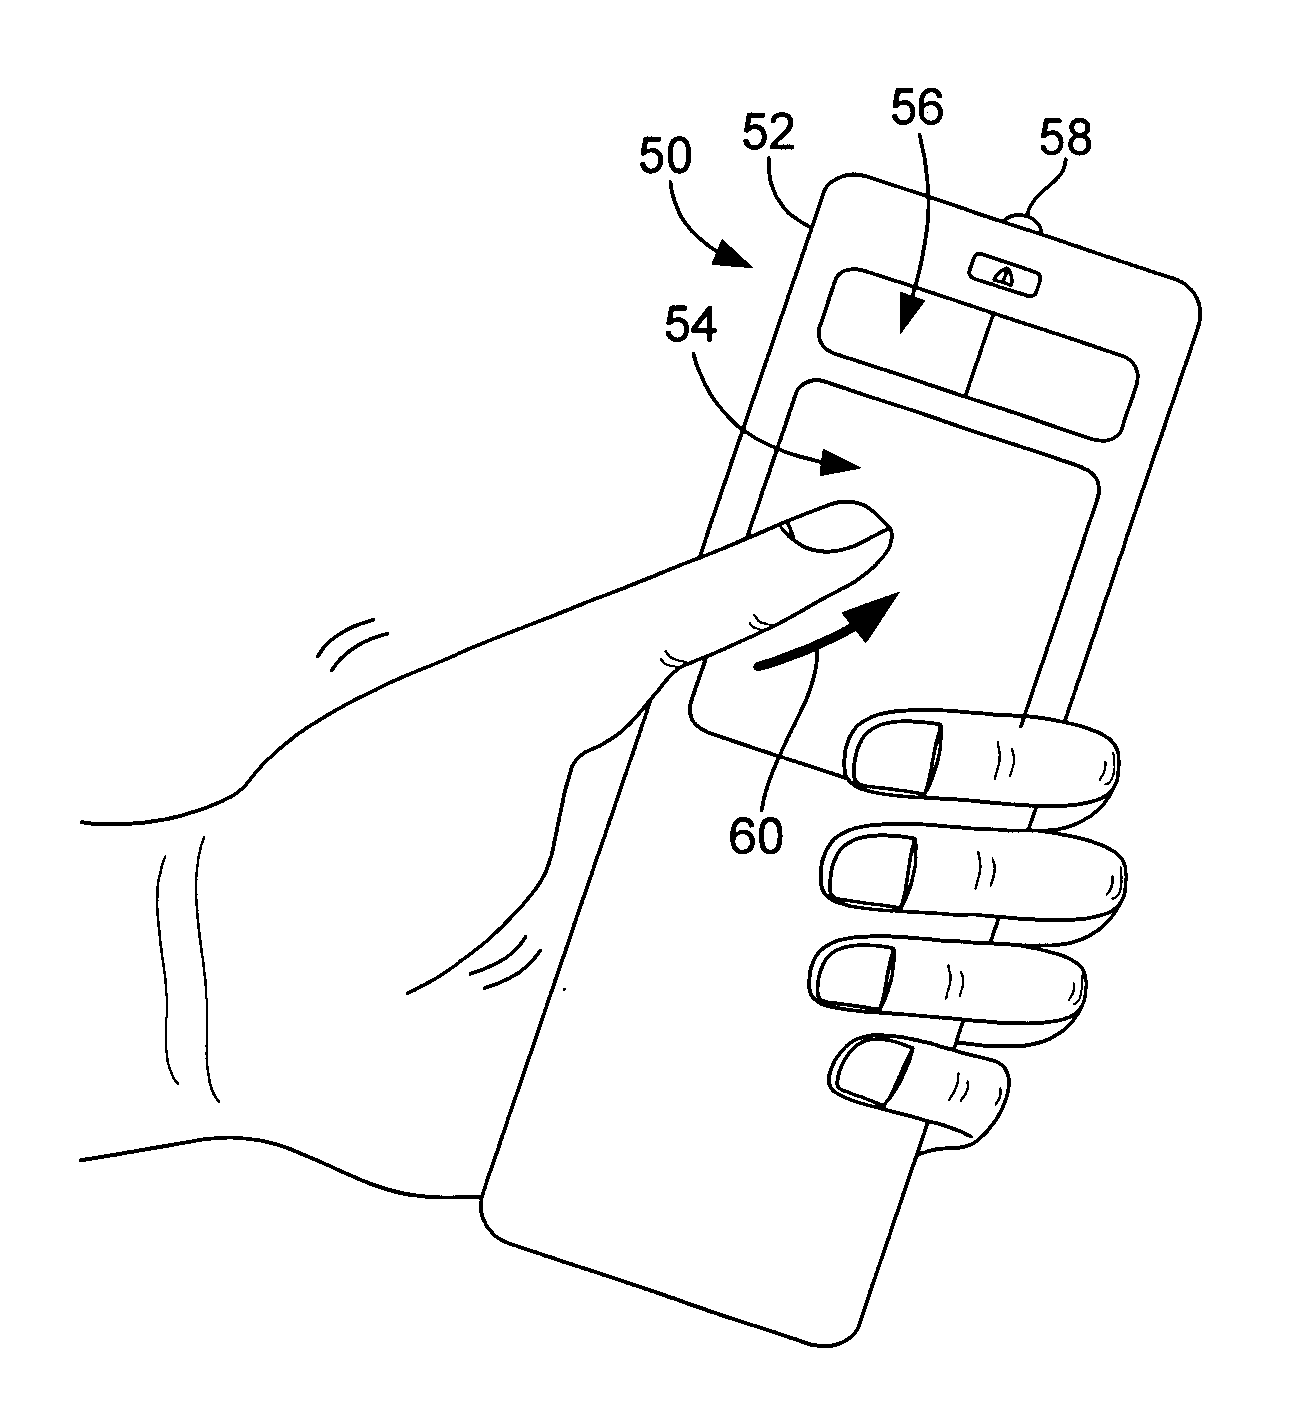 Remote control with touchpad and method